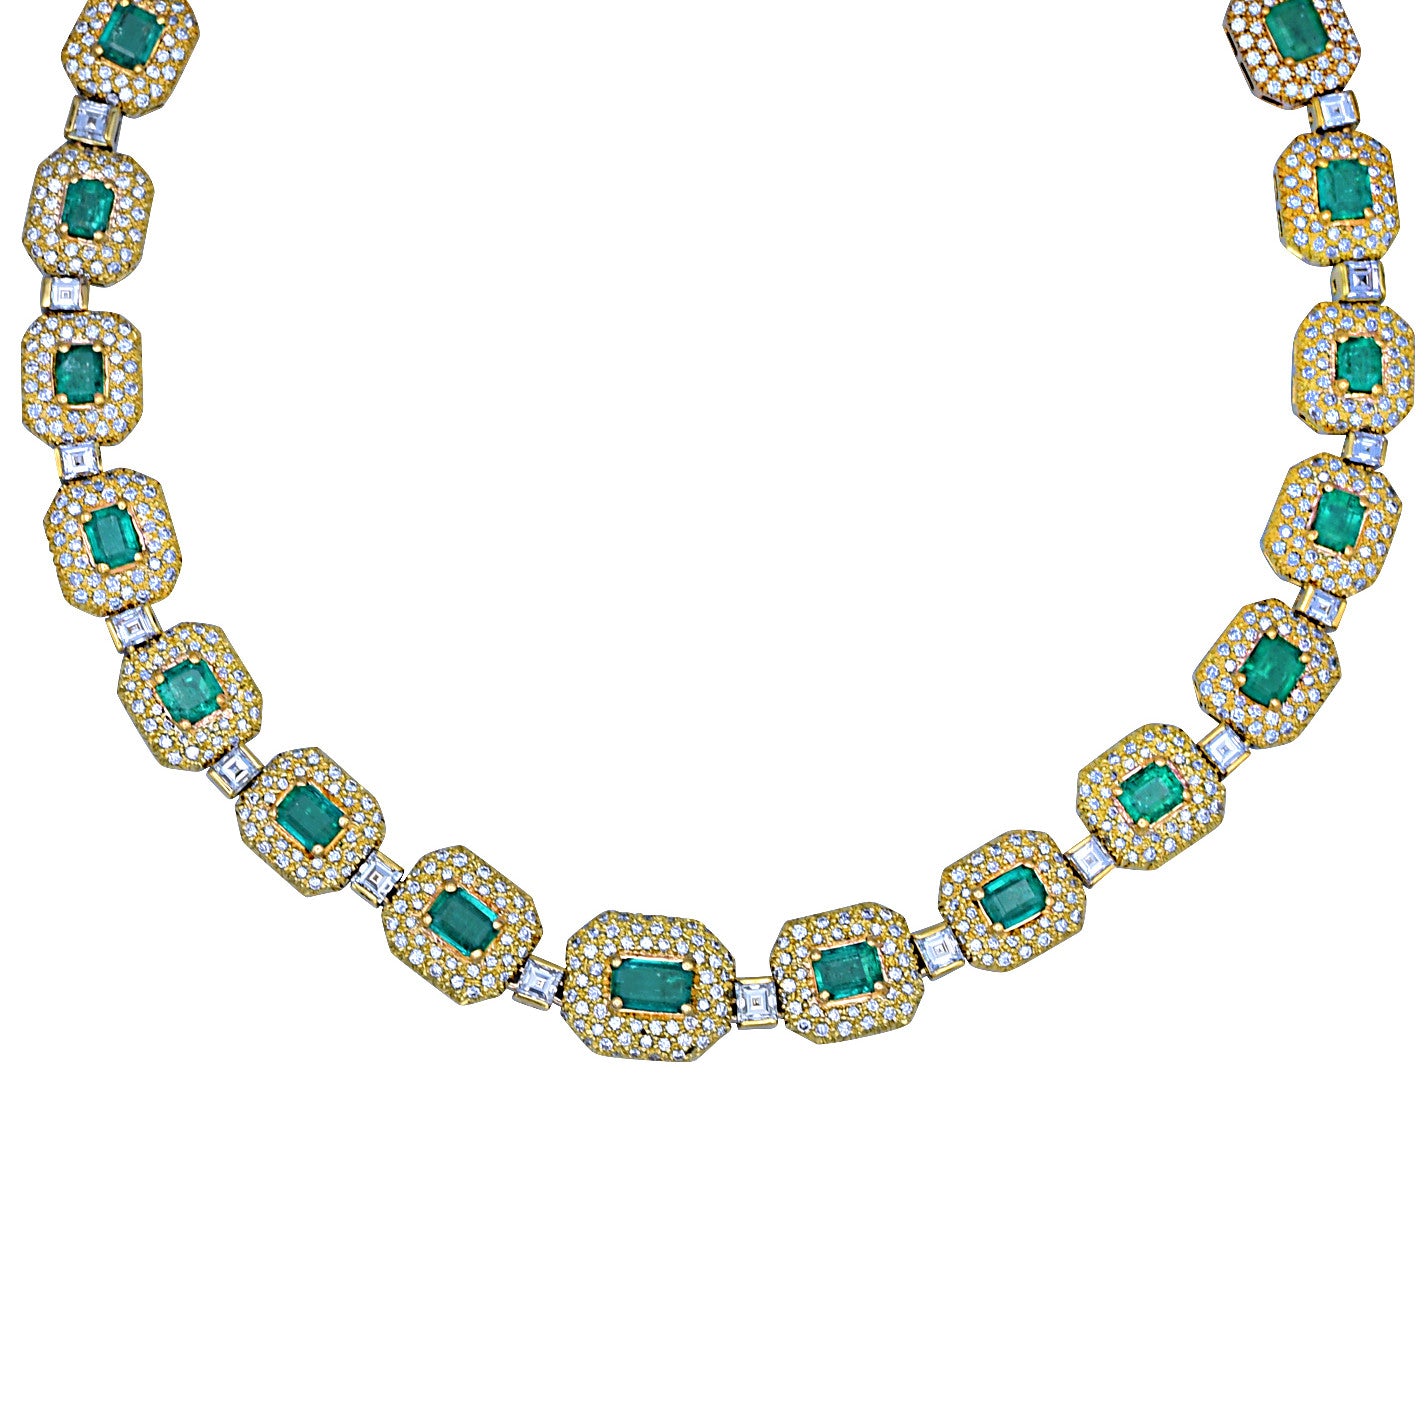 Post-1980s 14KT Yellow Gold Emerald & Diamond Necklace front view